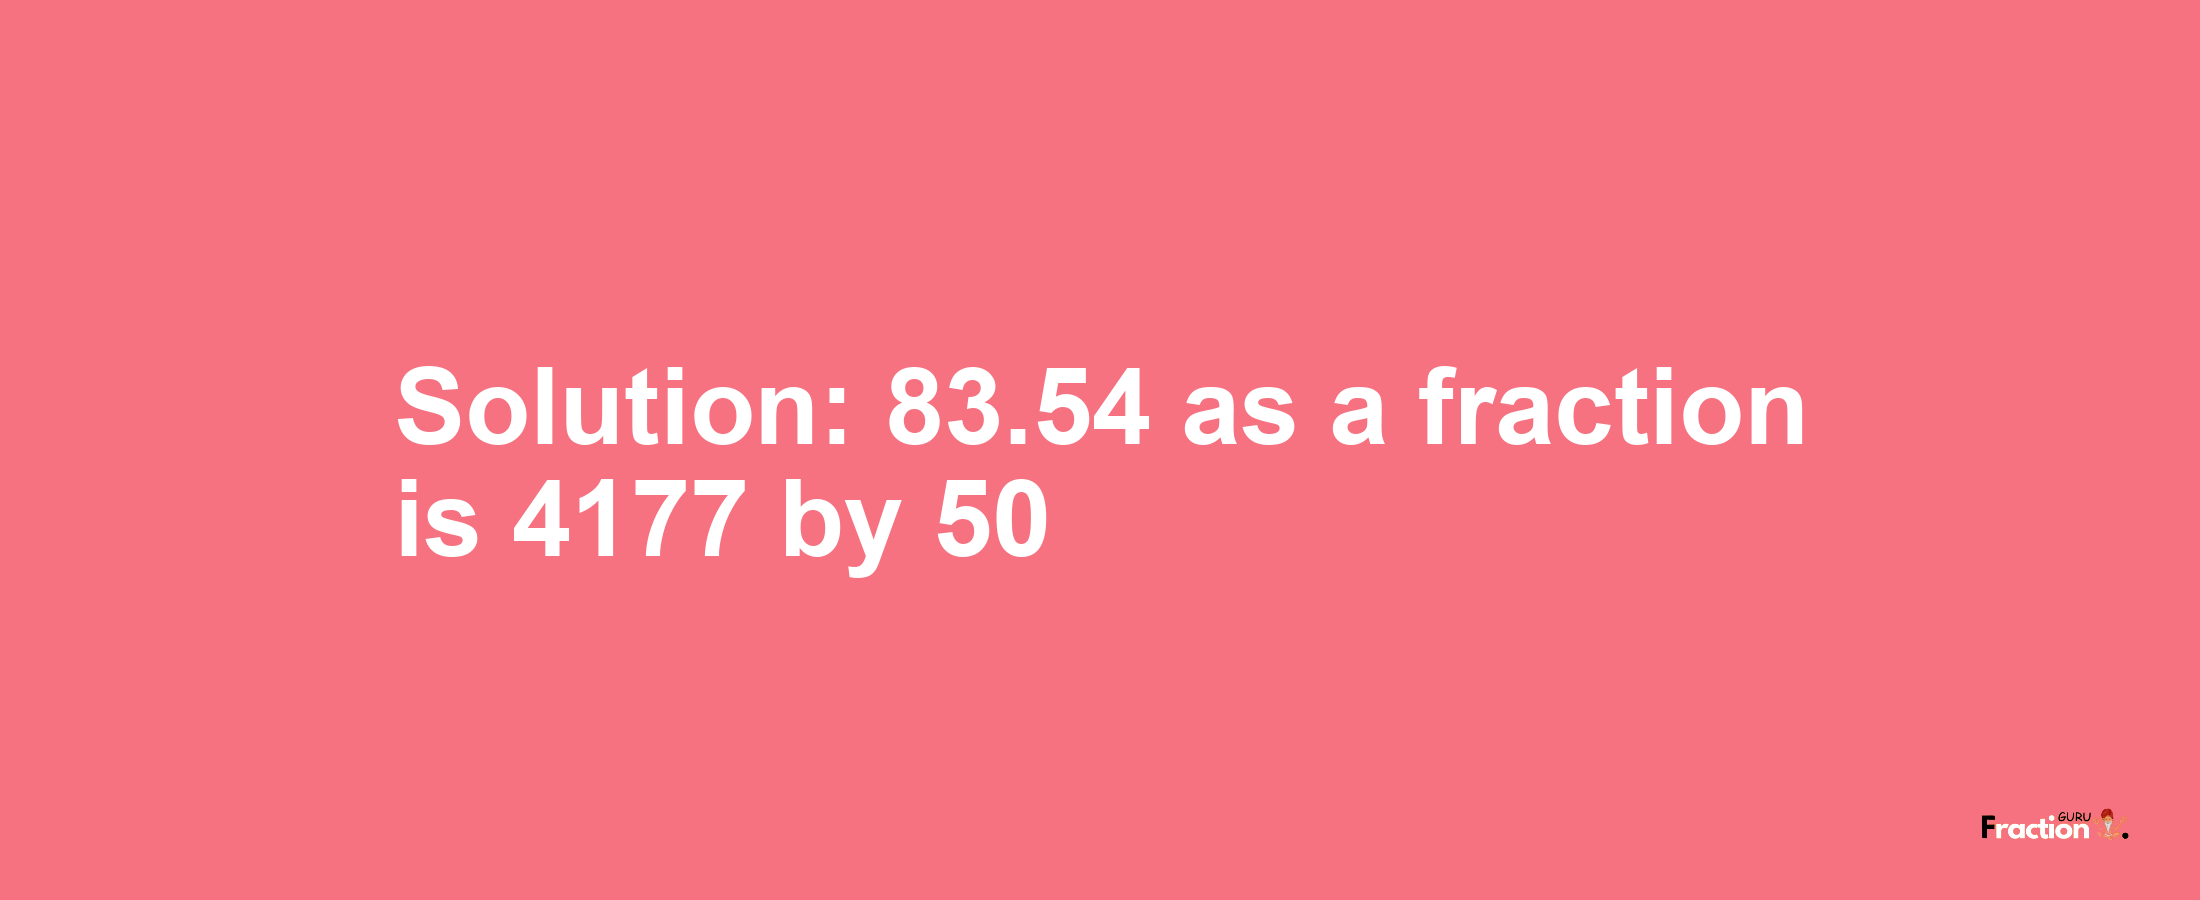 Solution:83.54 as a fraction is 4177/50